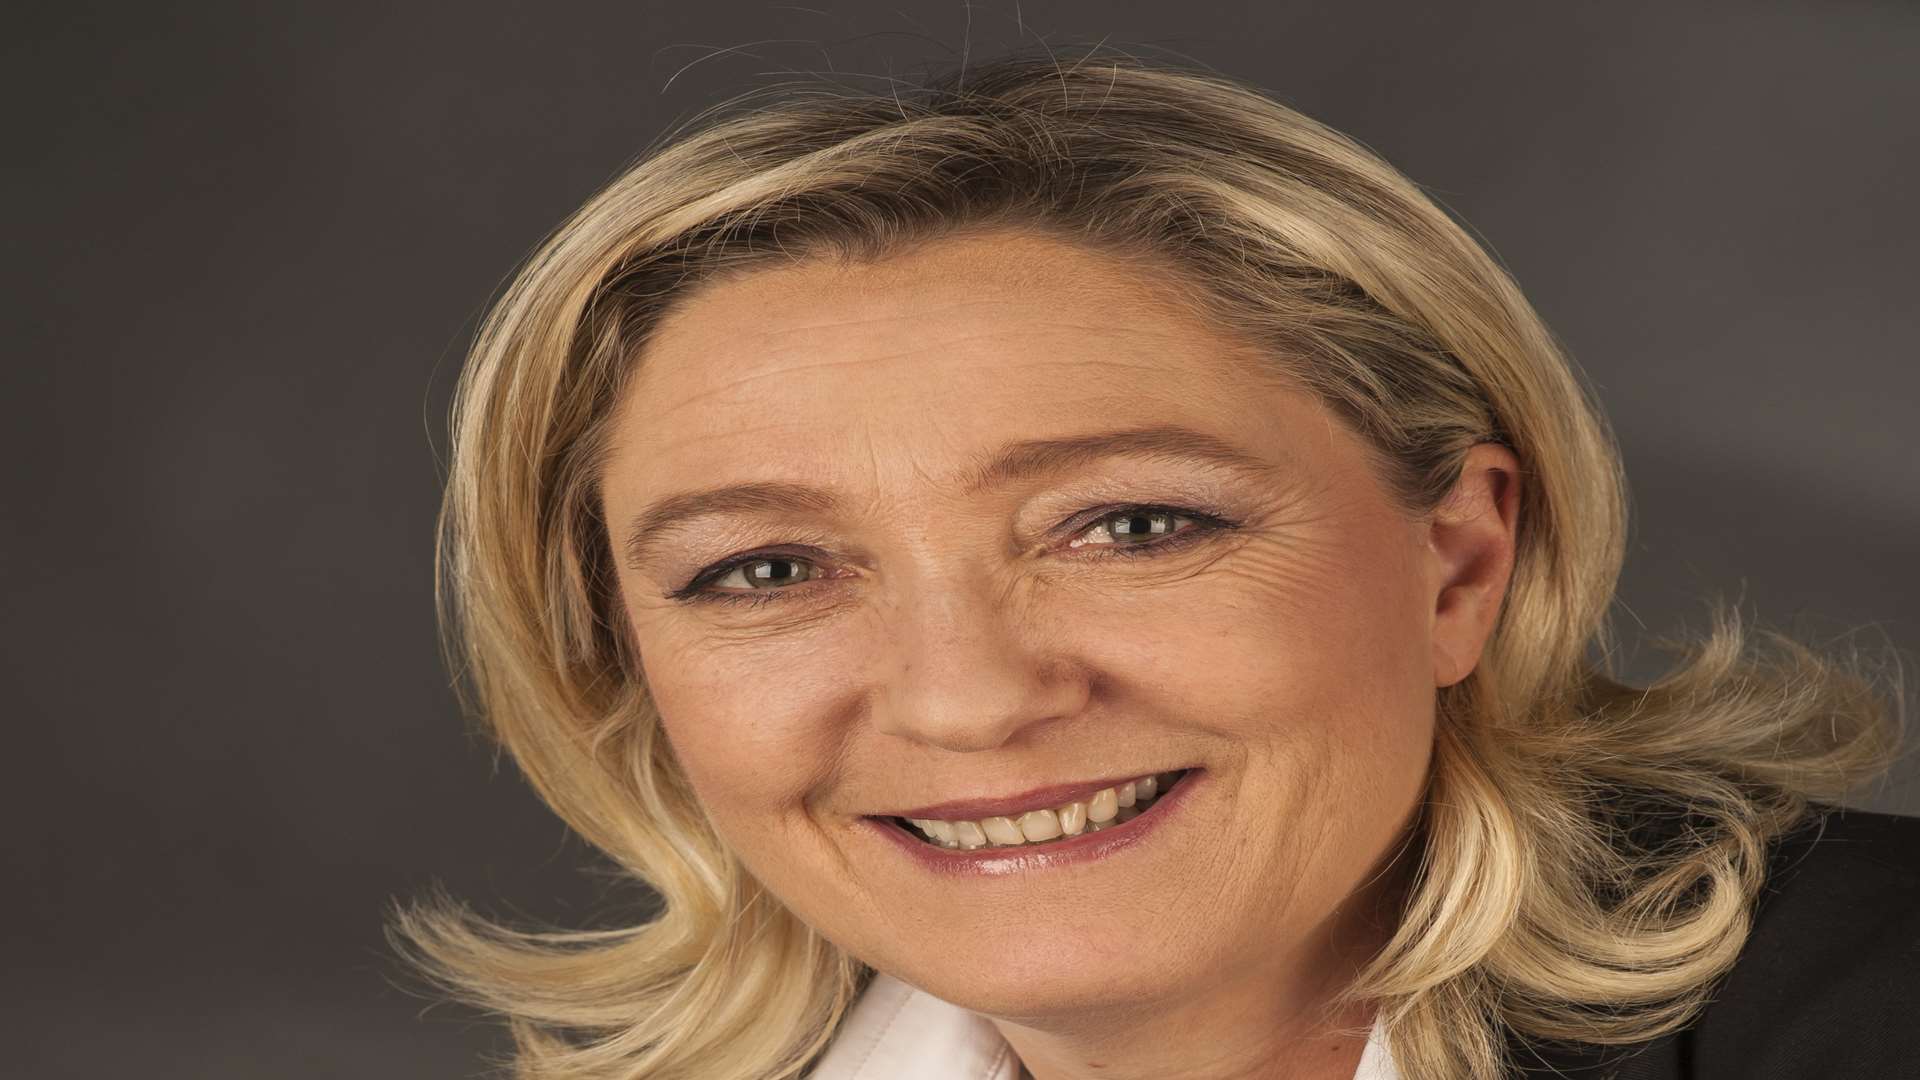 Marine Le Pen of France's right-wing Front National.